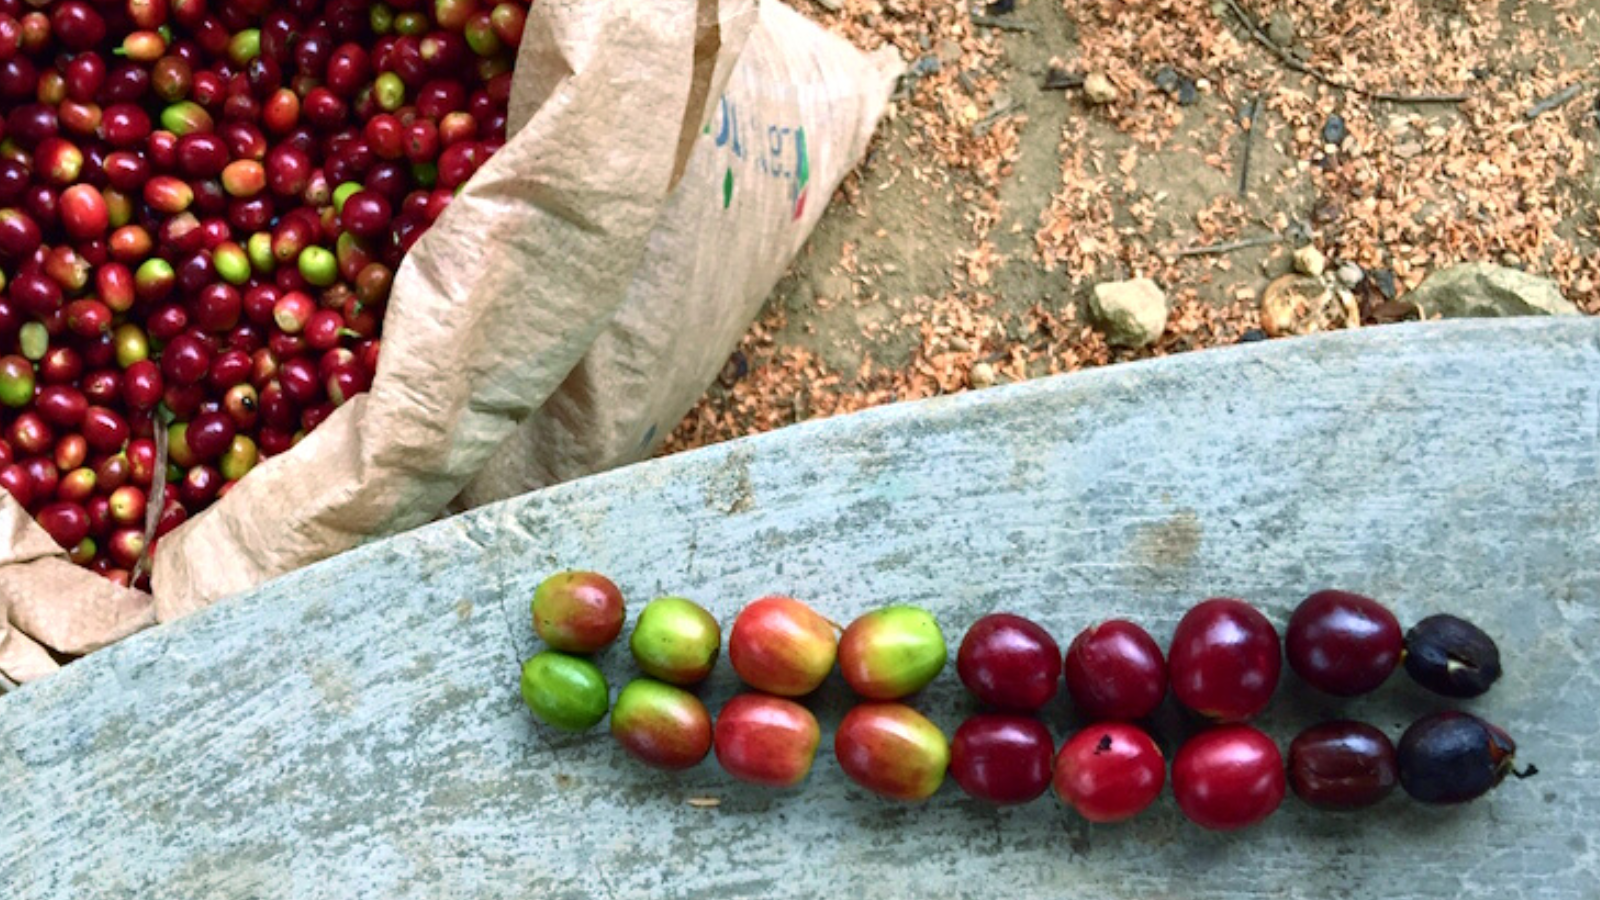 Coffee cherries at varying degrees of ripeness